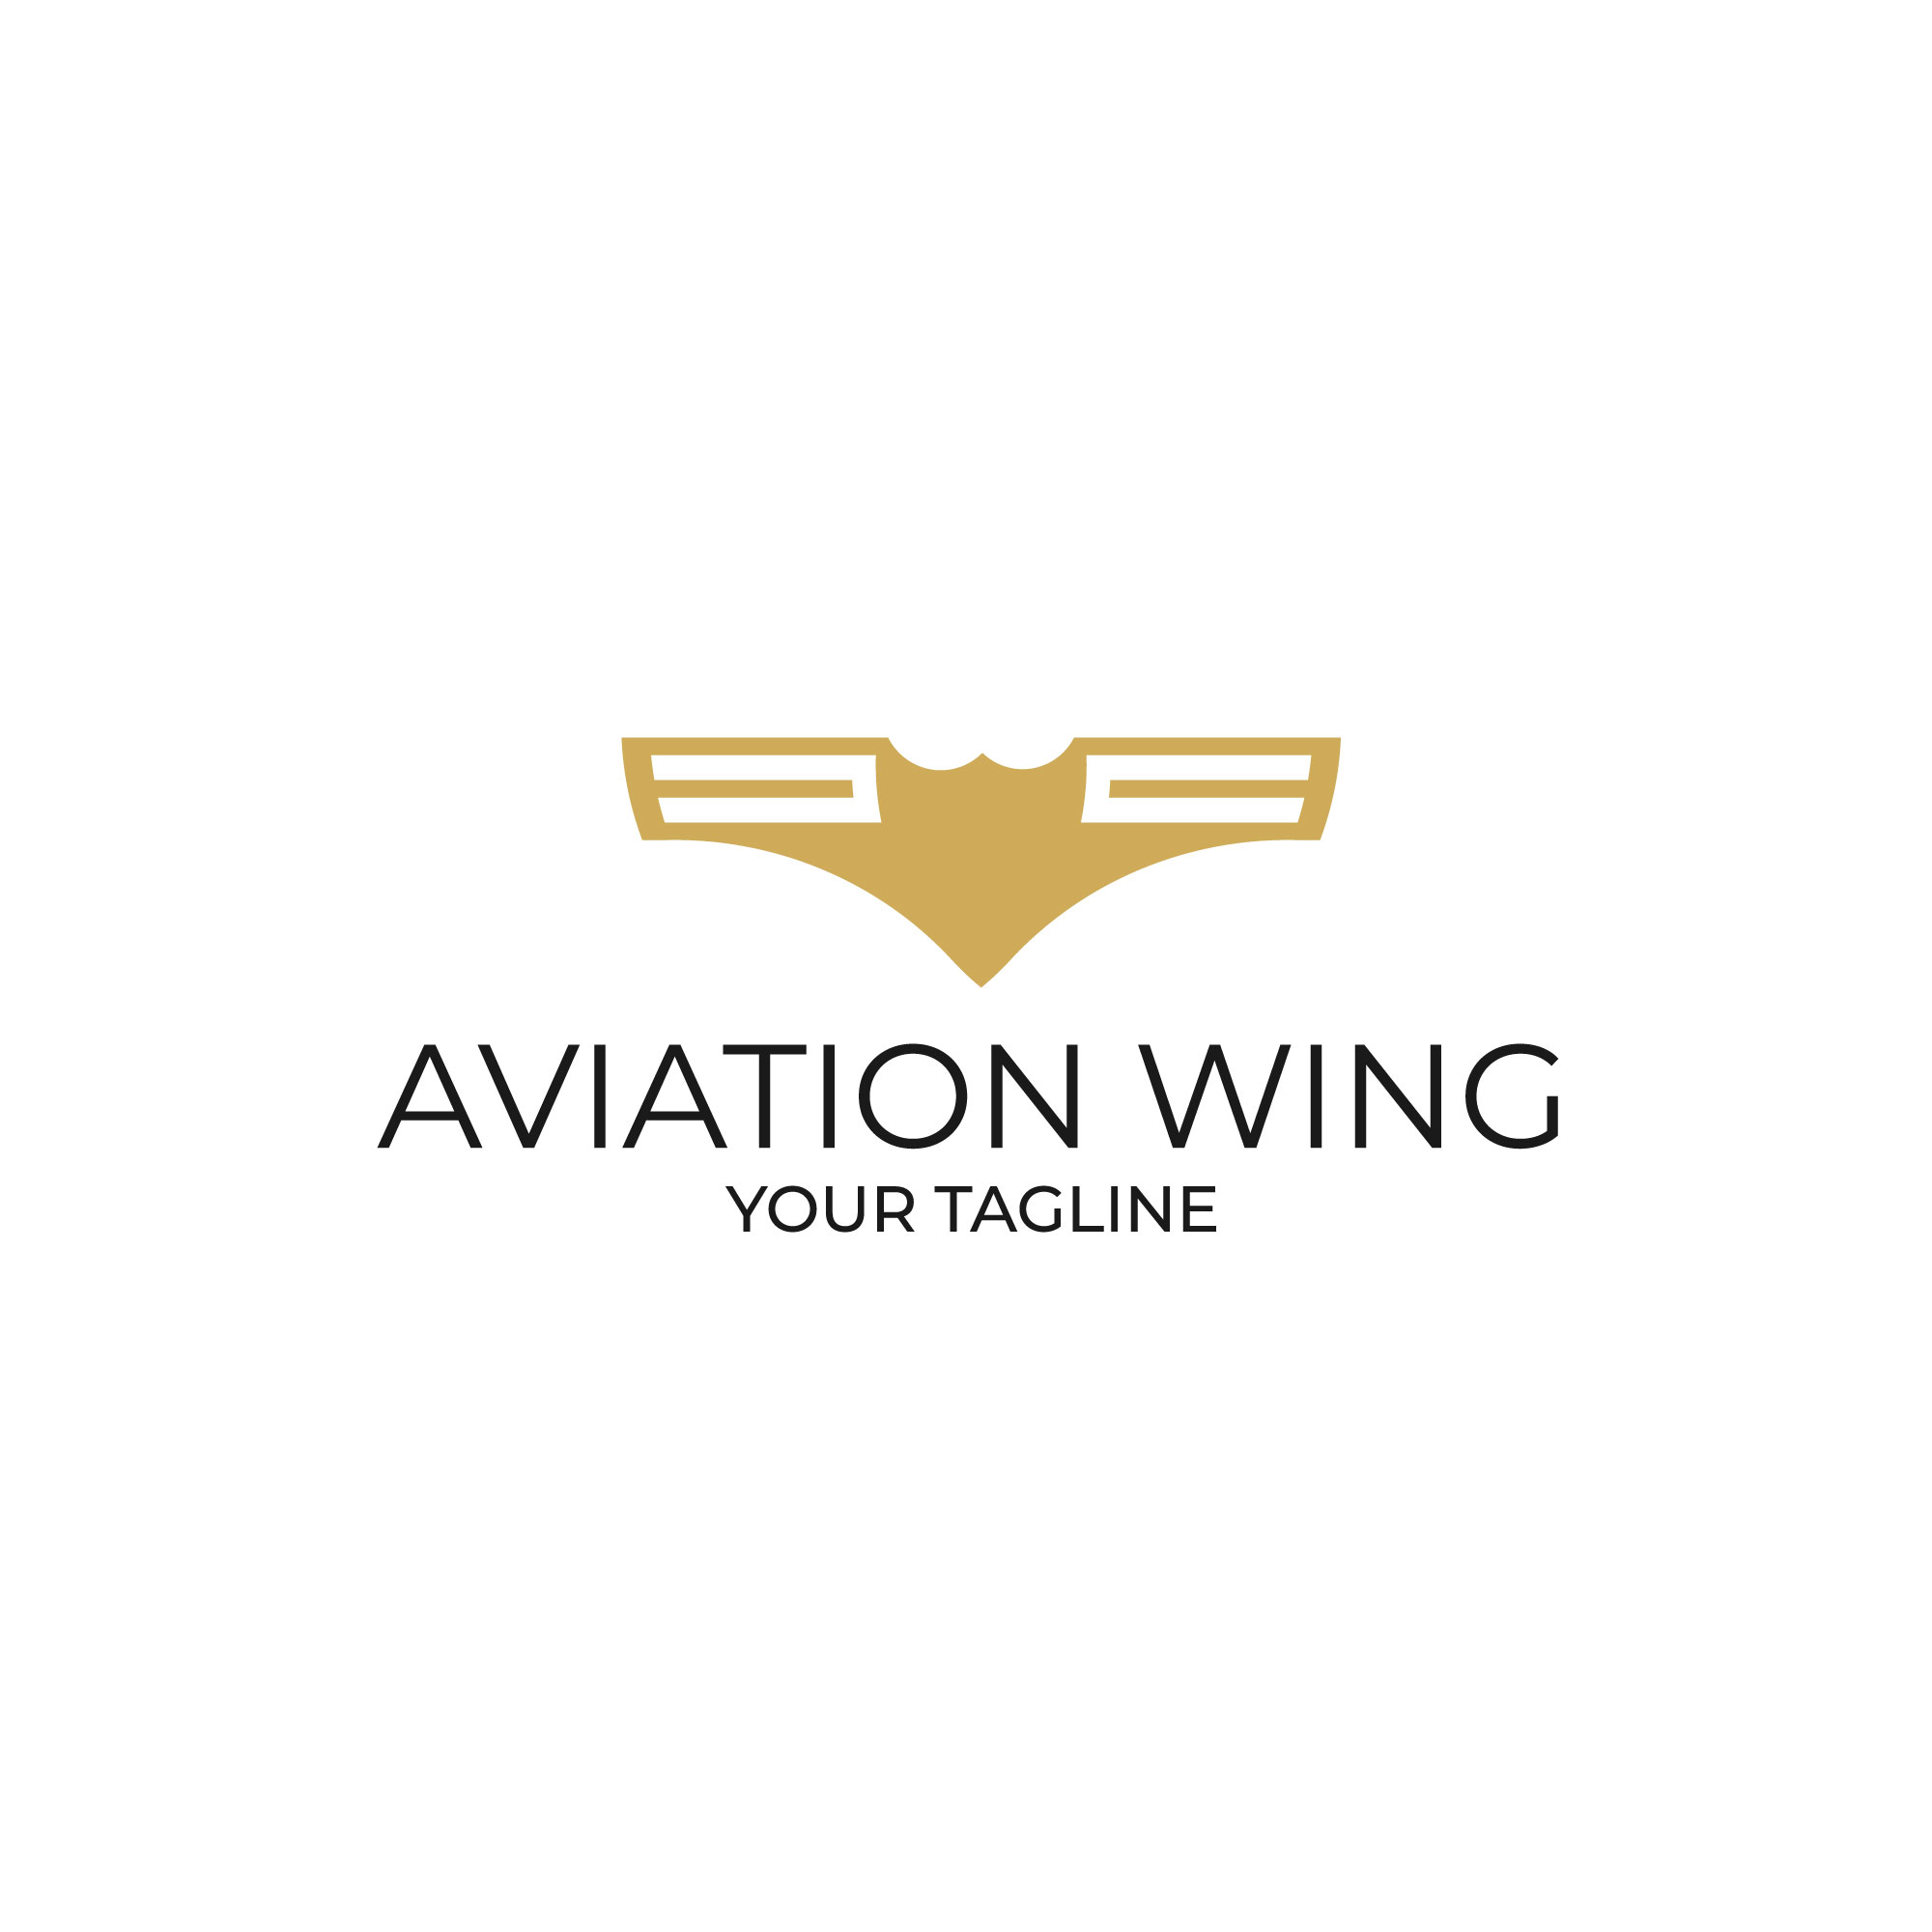 Aviation wing security logo